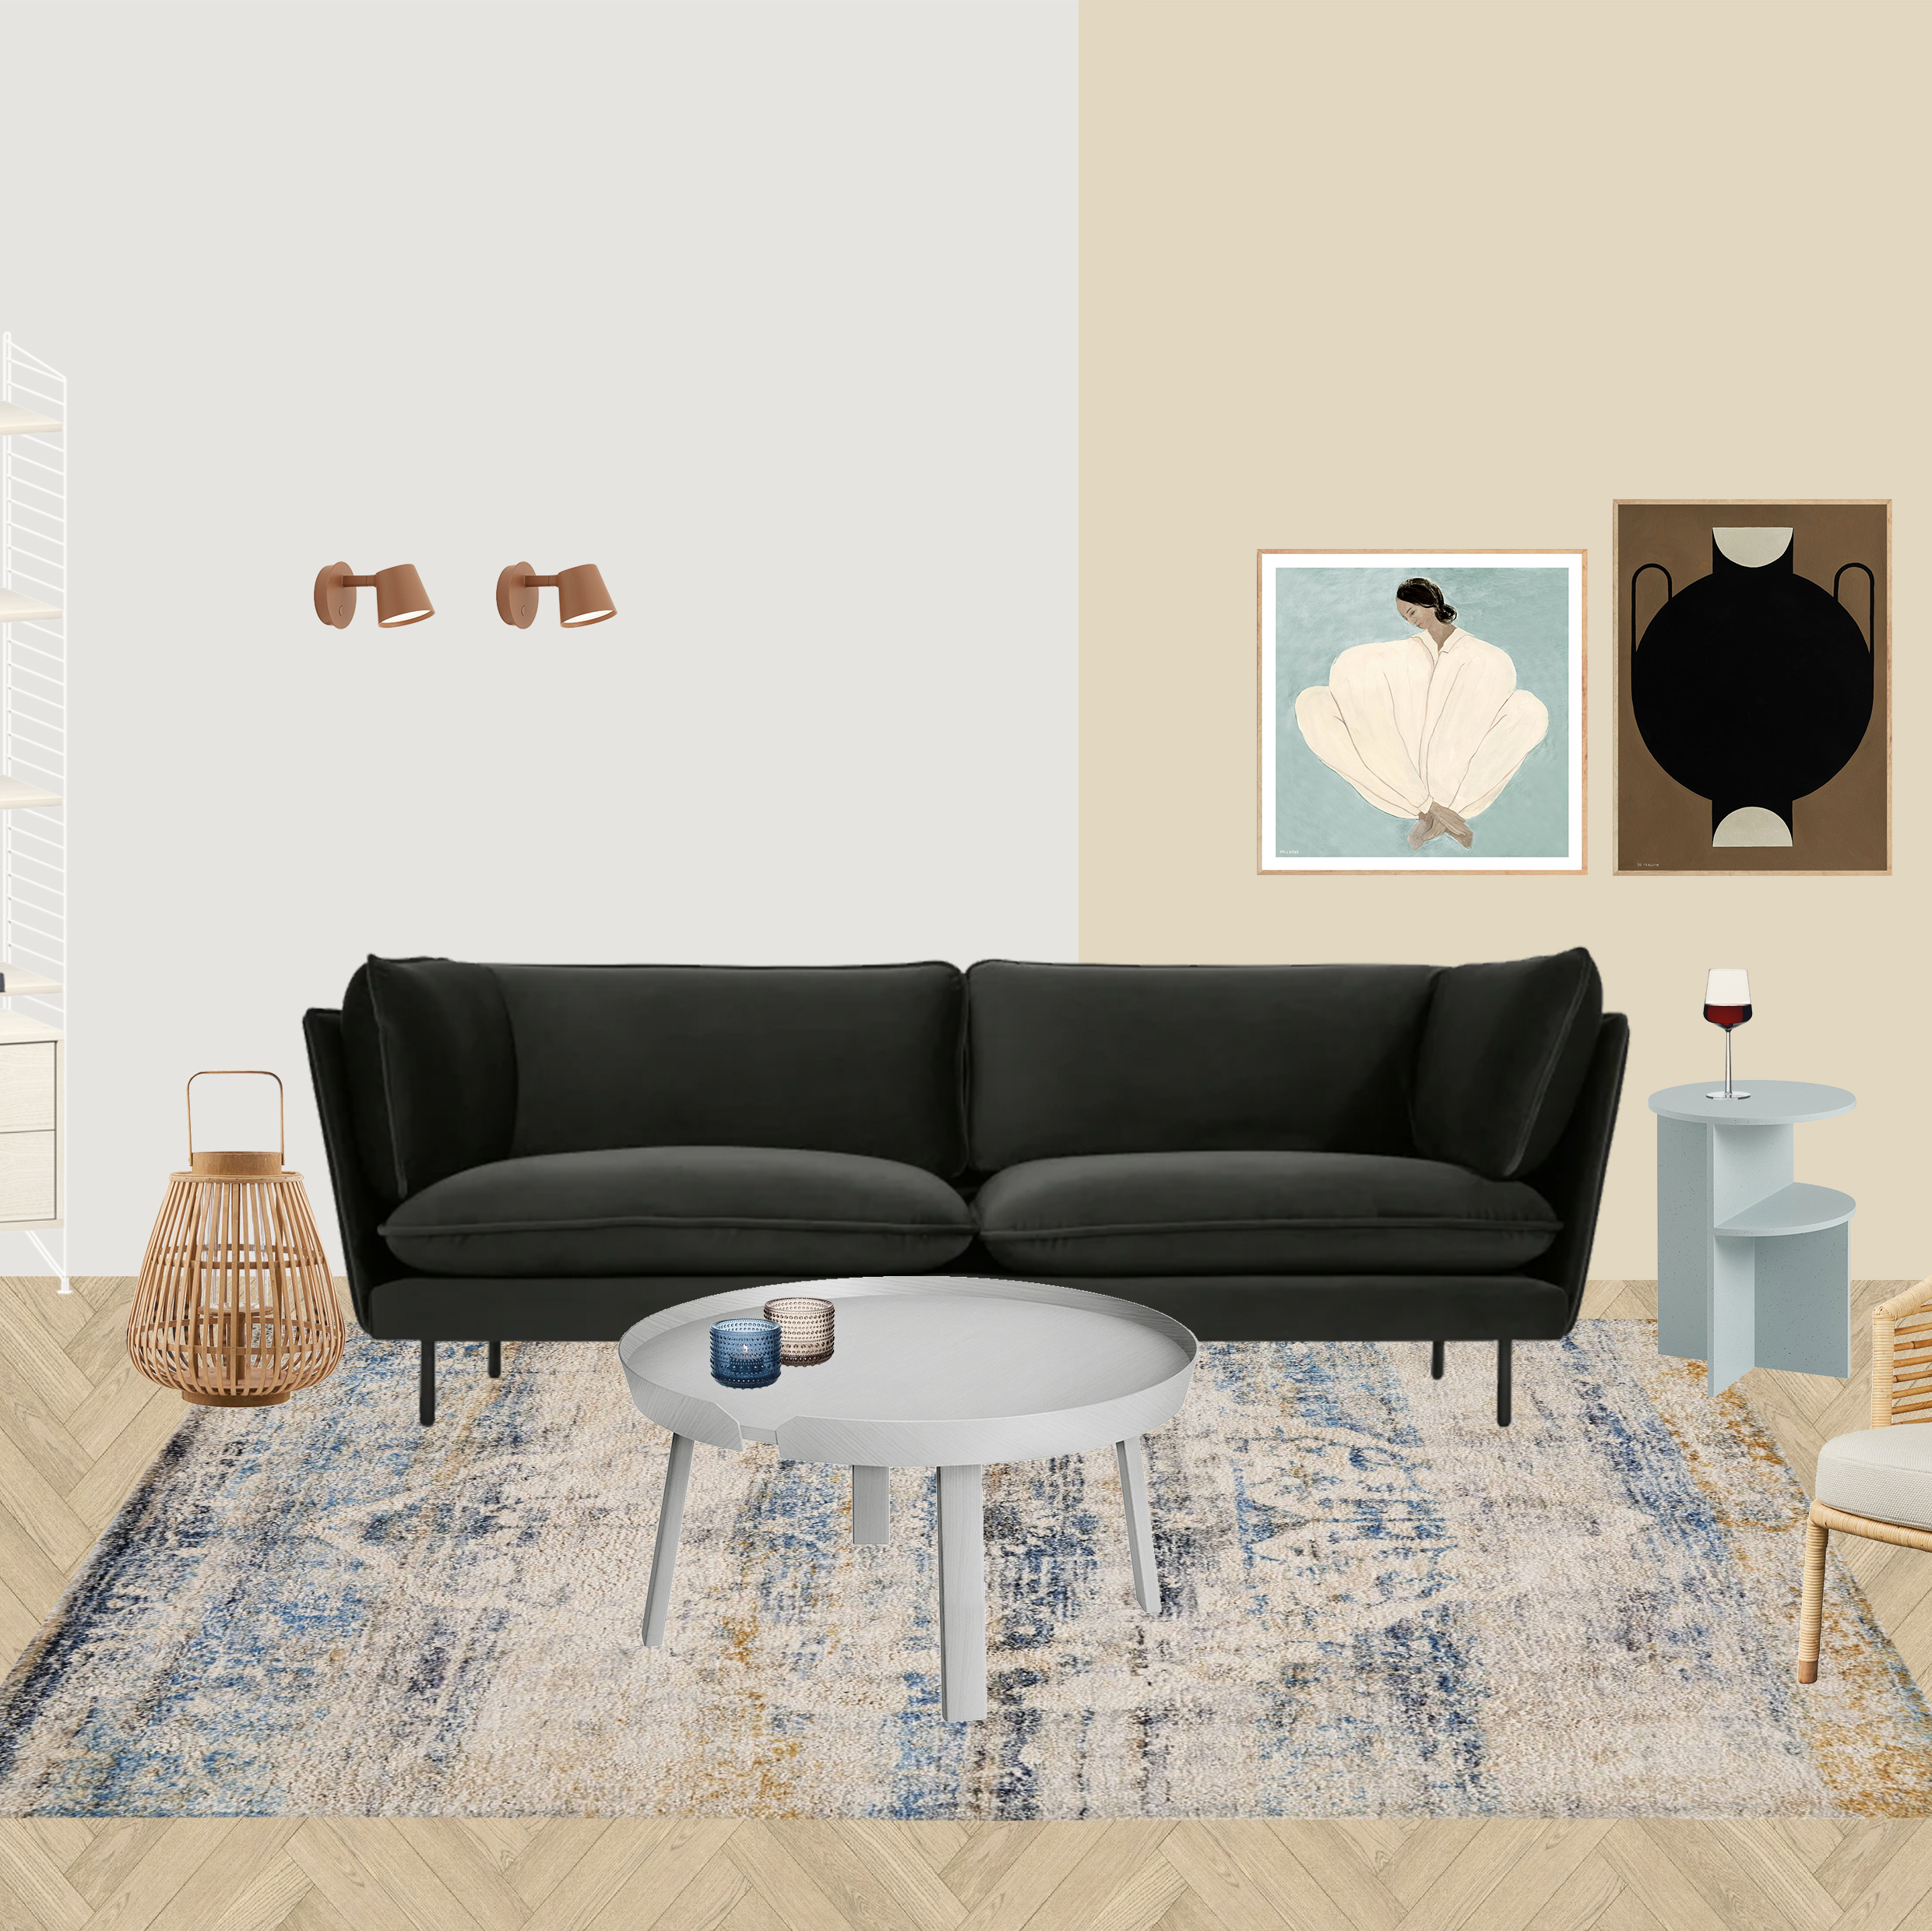 living-room-beige-and-blue